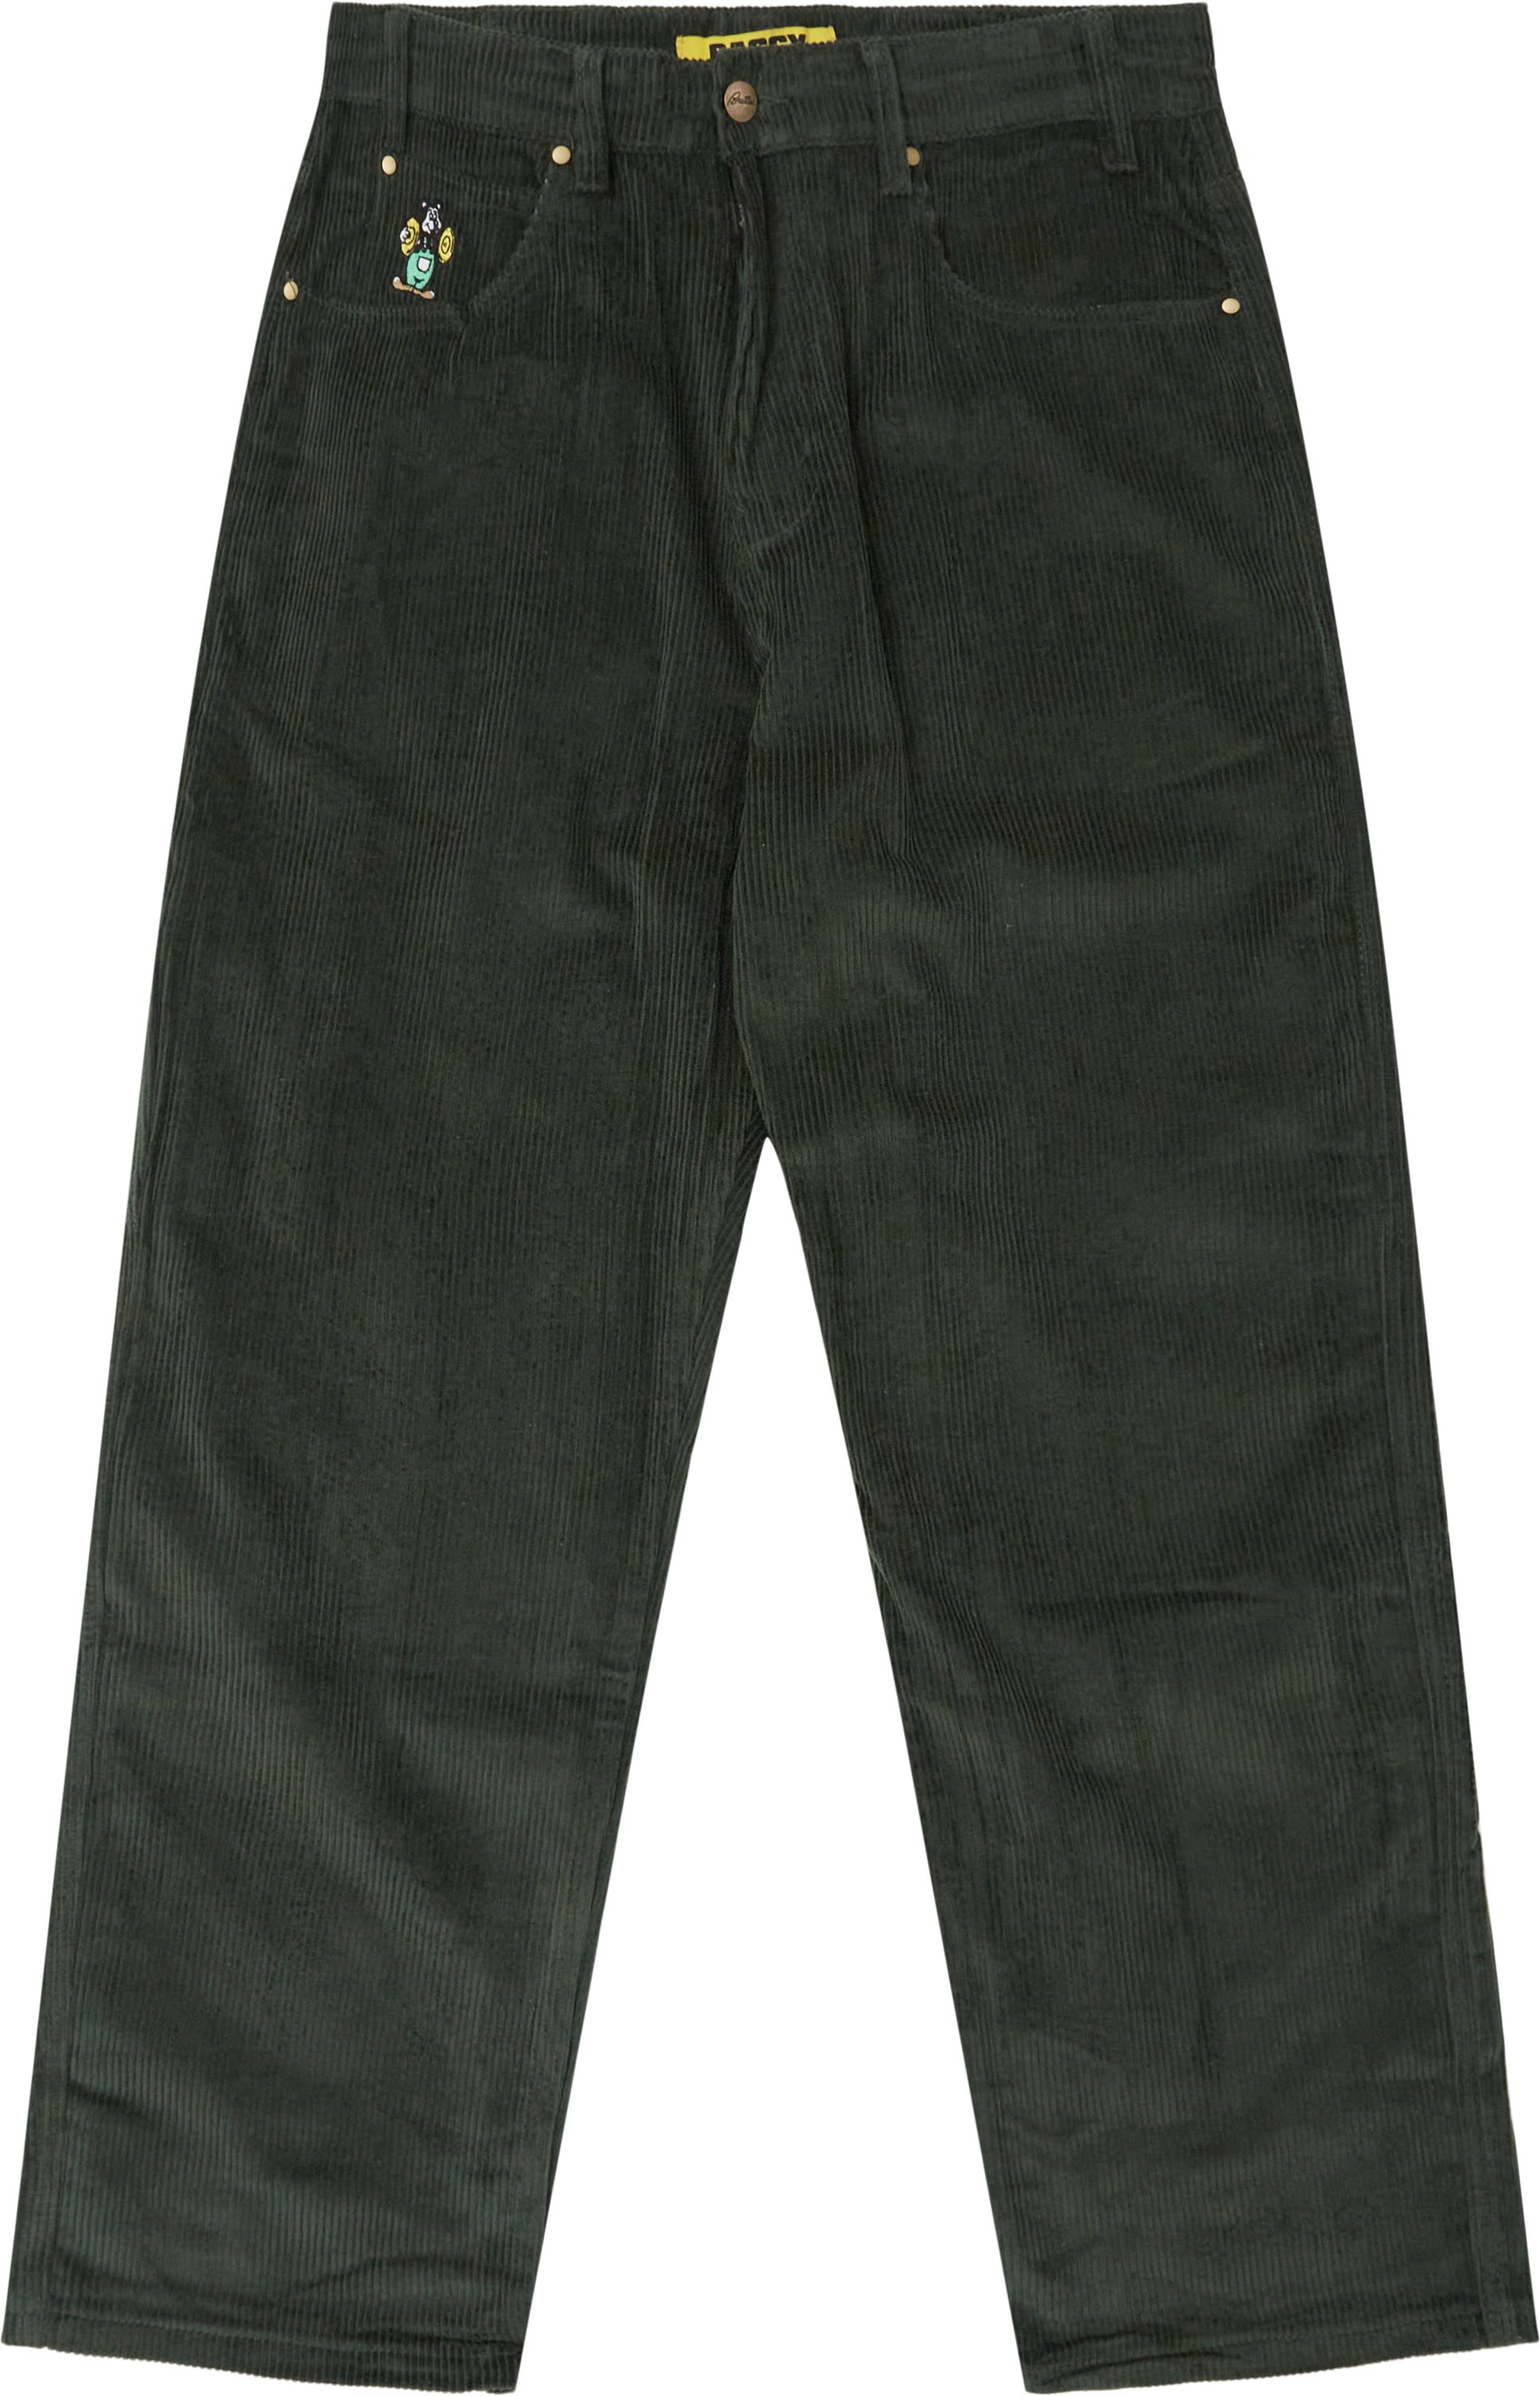 Butter Goods Trousers CYMBALS CORDUROY PANTS Green